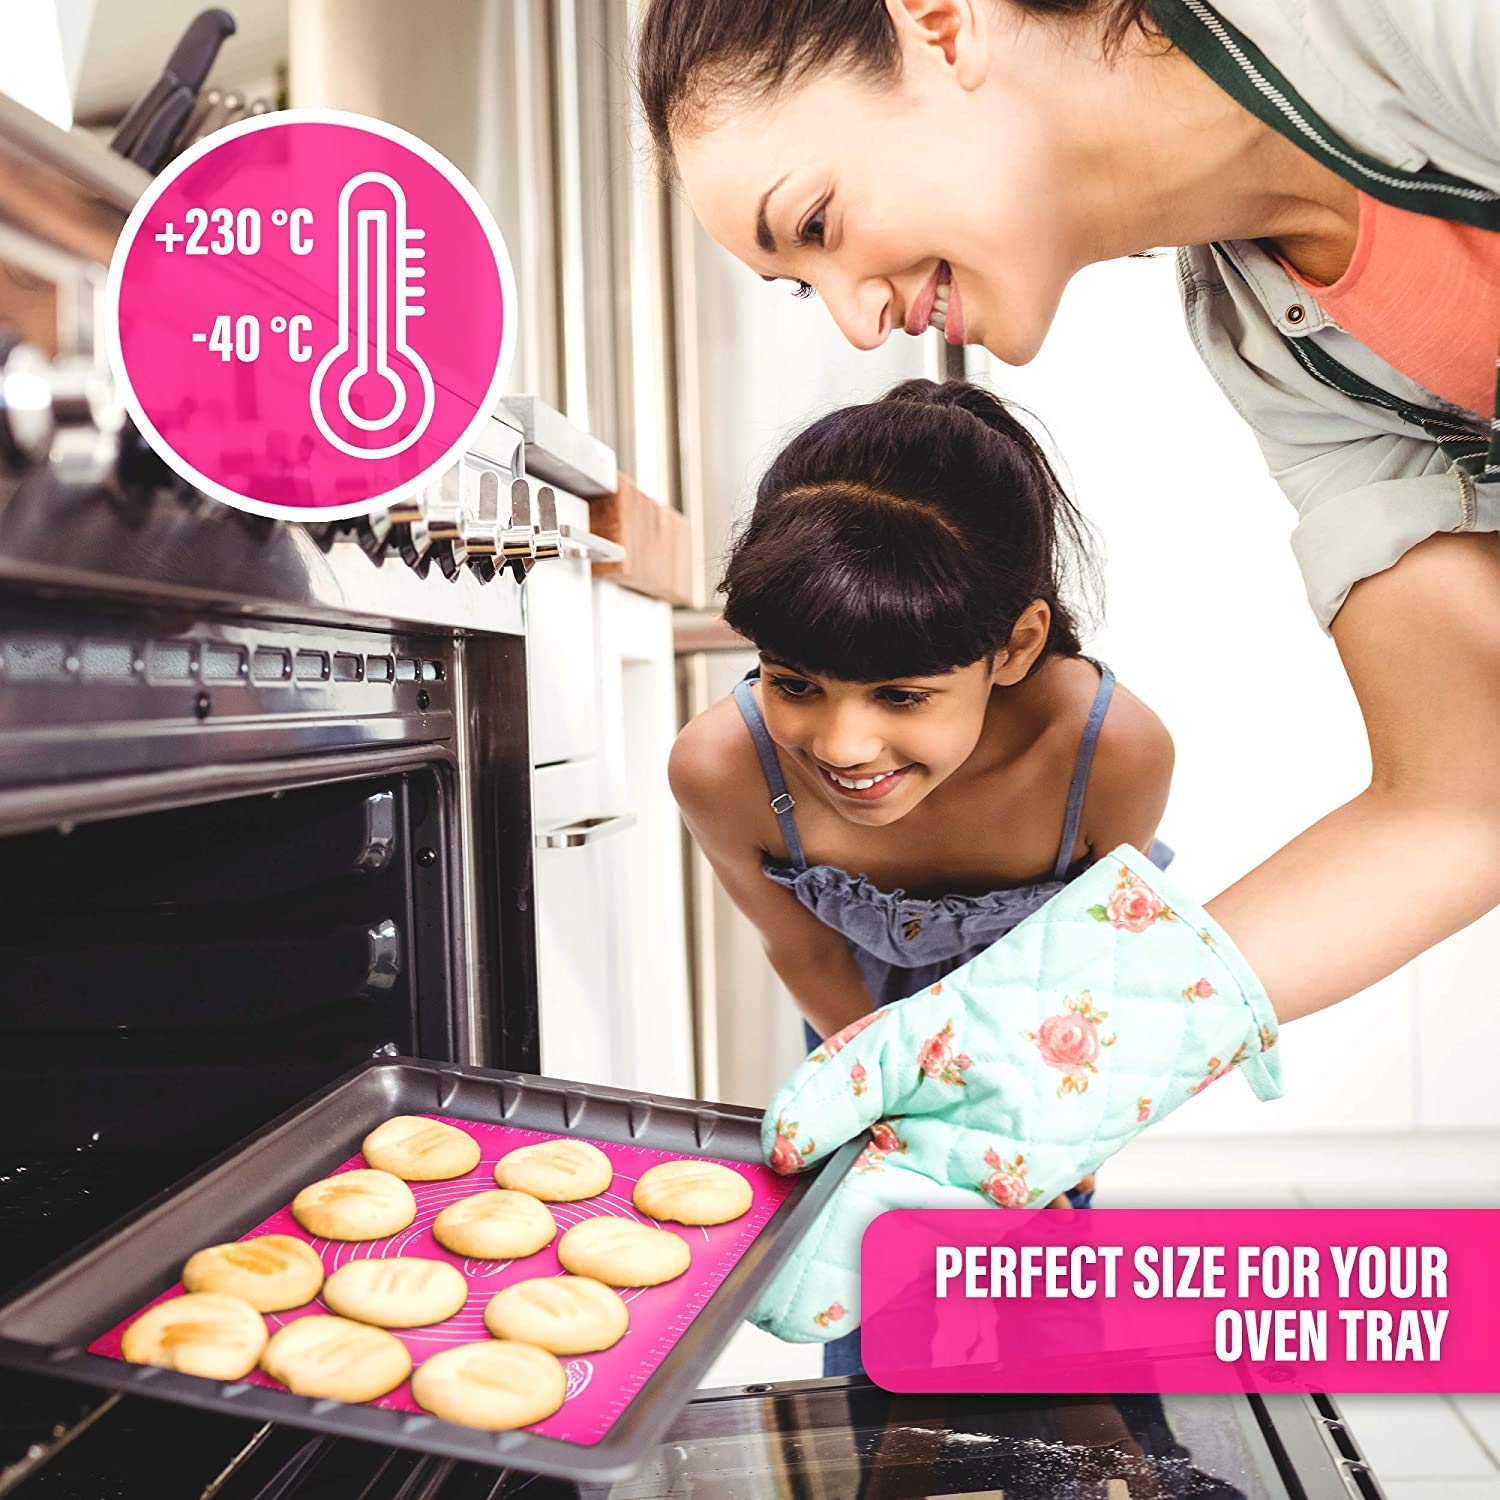 Alciono Baking Mat for Pastry, Non-Stick Pastry Mat Board Table Placemat Pad for Baking,Rolling Dough with Measurements, Reusable Heat-Resistant BPA Free - Pink, Size : 20 in X 16 in.